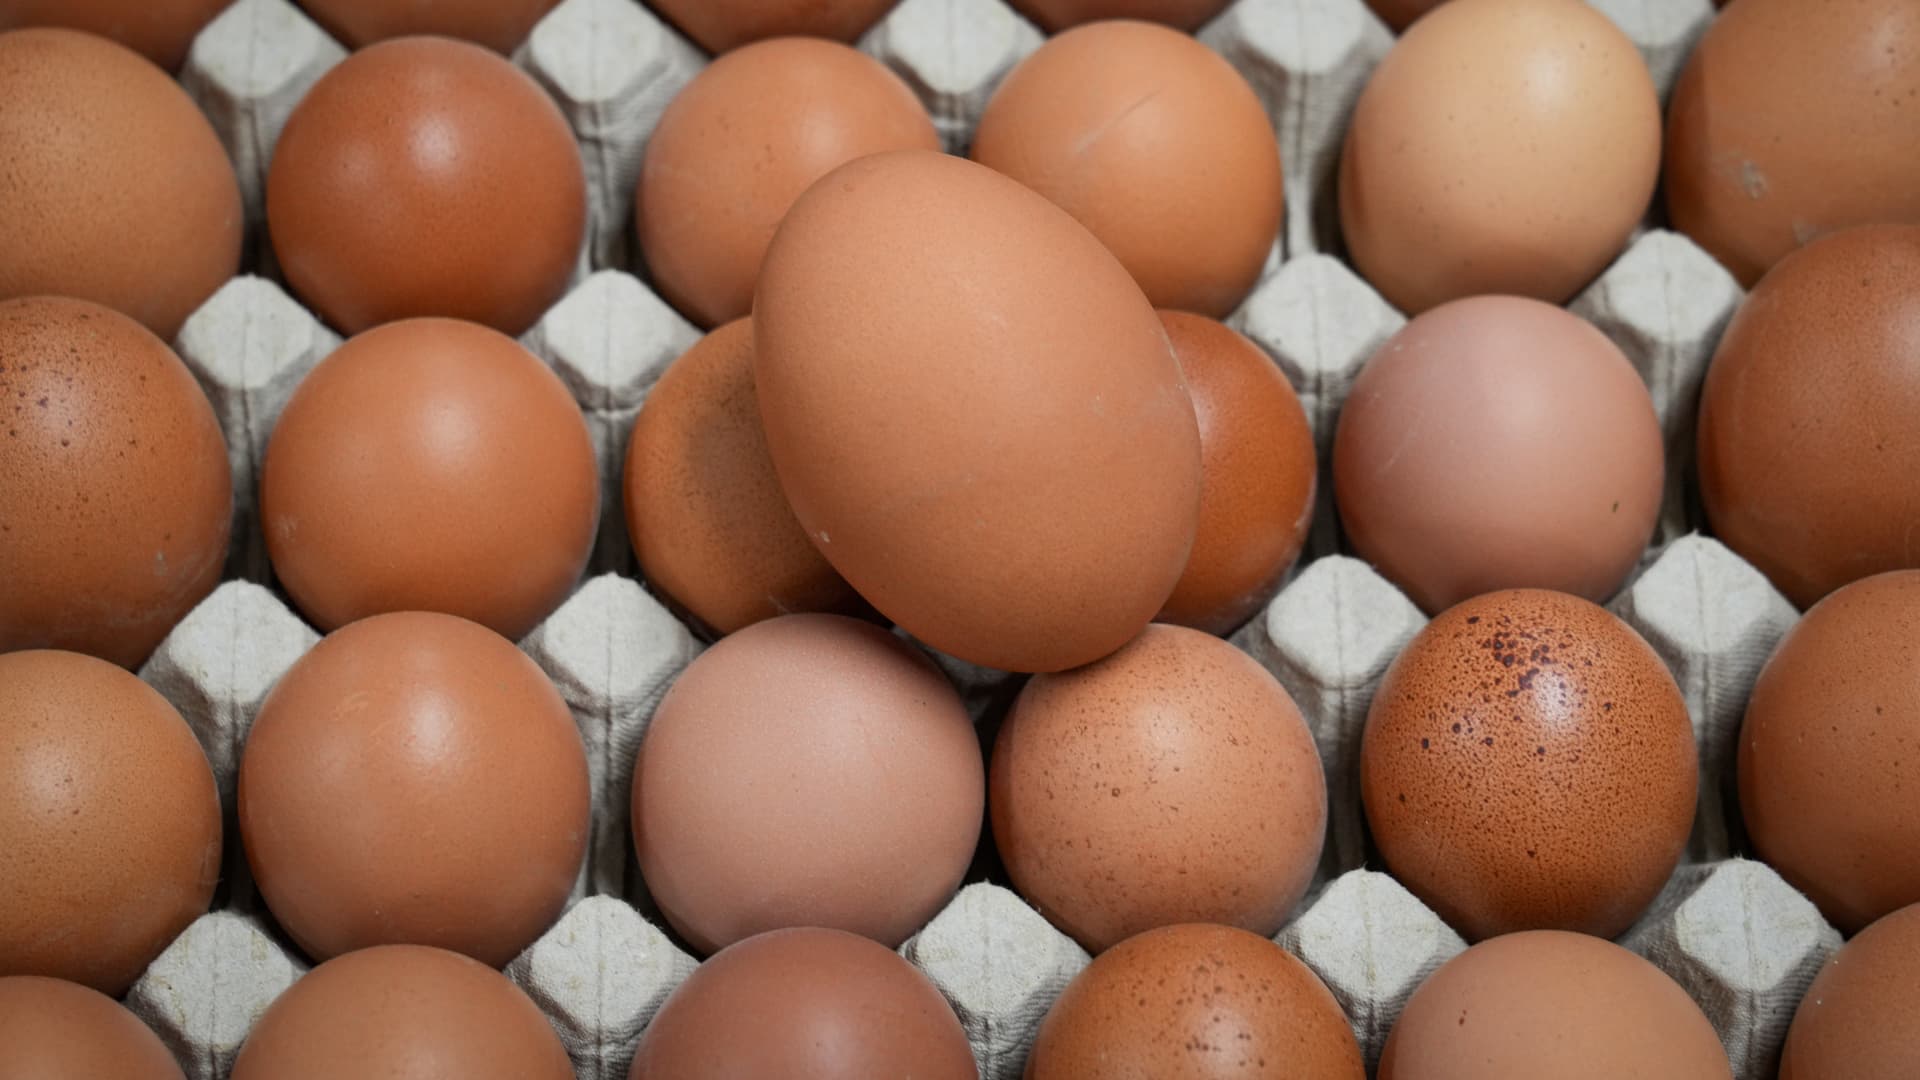 Bird flu resurgence drives up egg rates, spurring some to inventory up